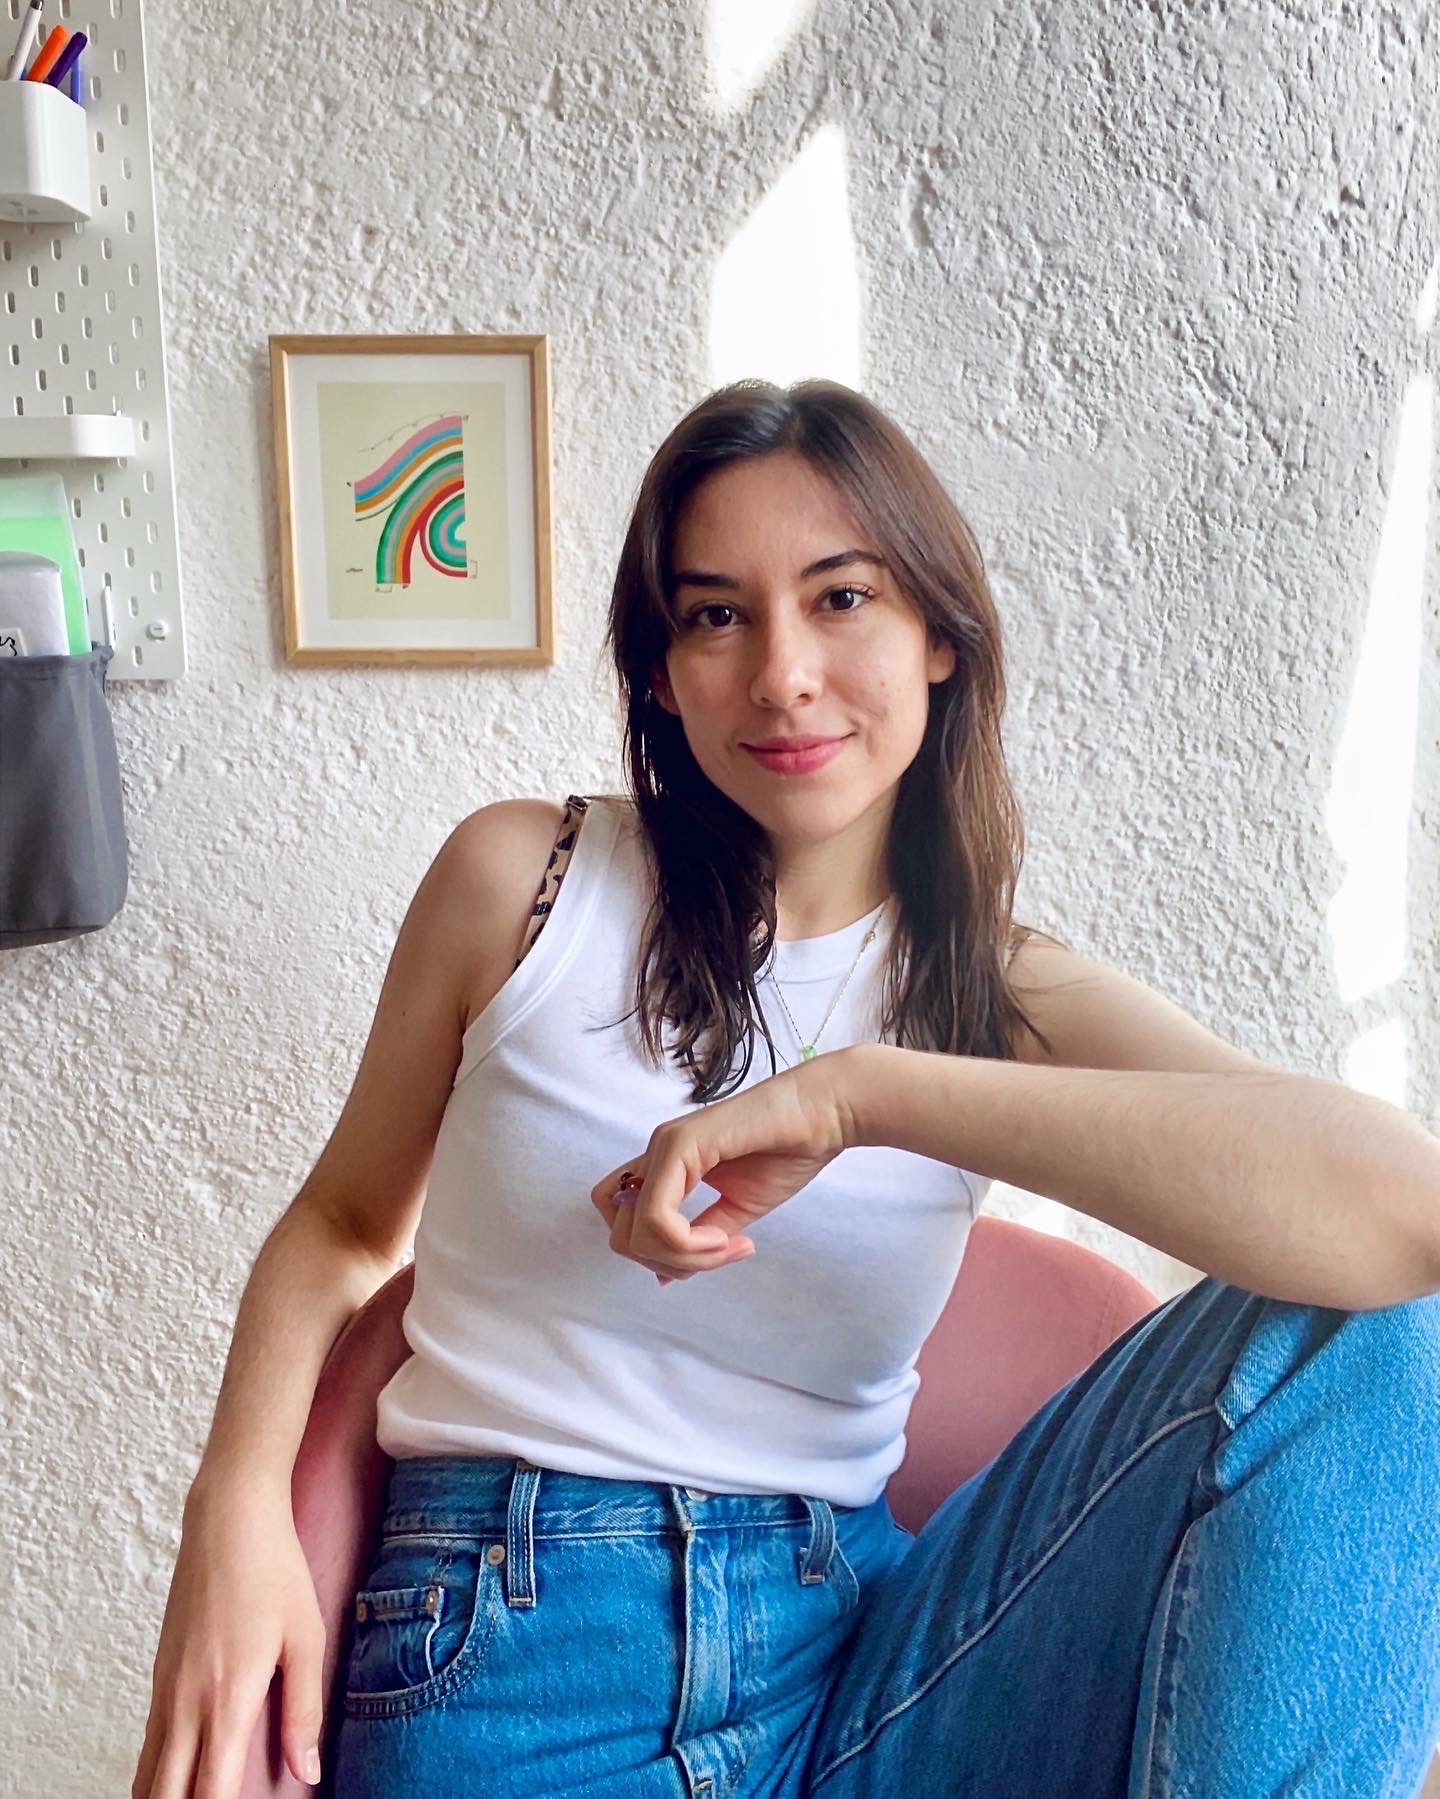 girl posing on a chair with her elbow on her knee, she is wearing blue jeans and a white tank top